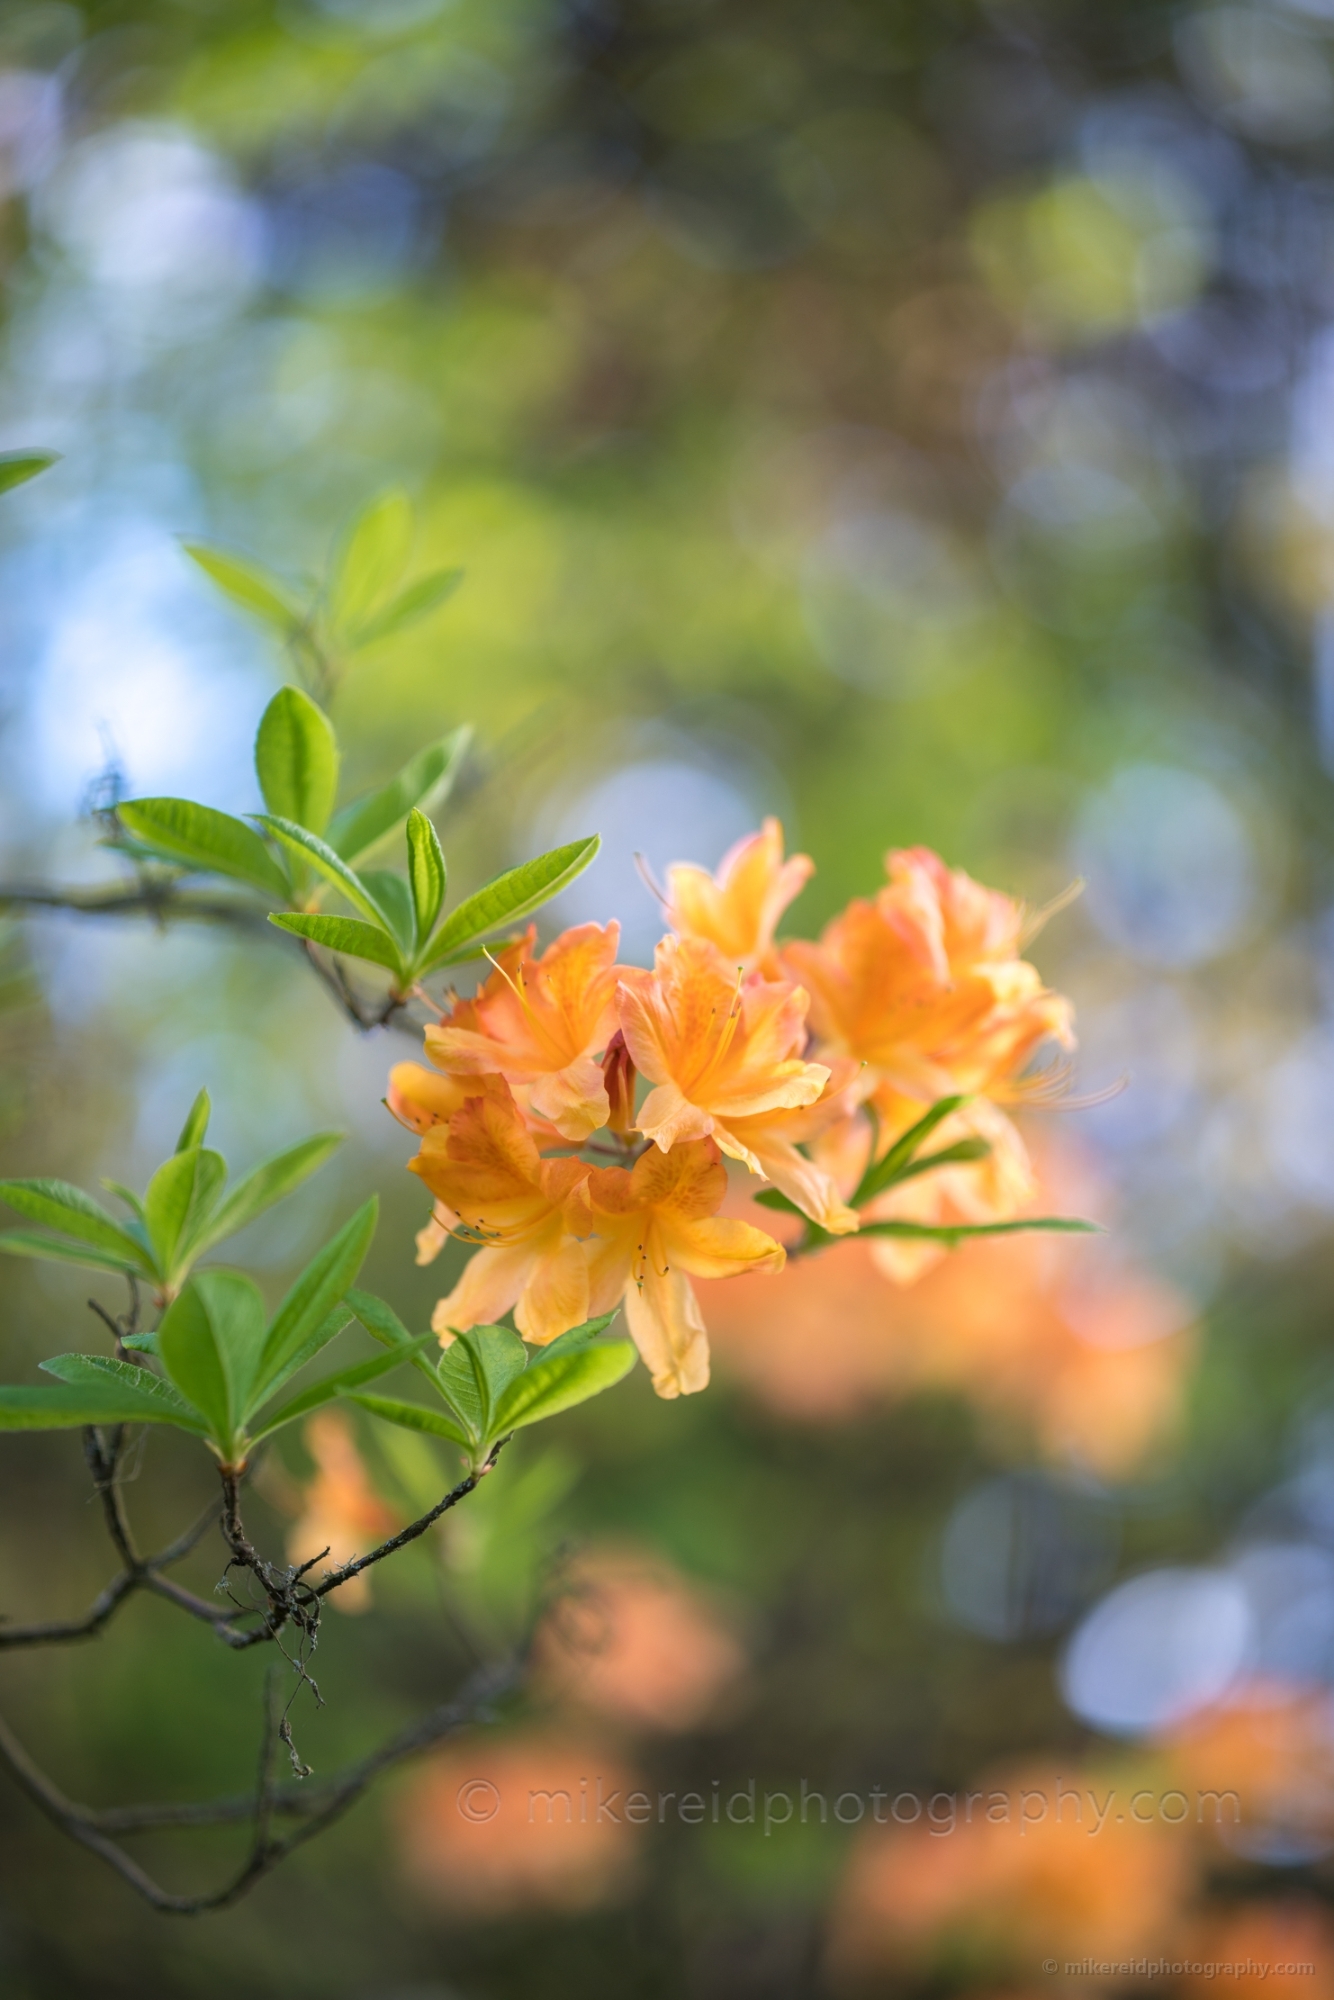 Rhododendron and Azaleas Photography Yellow Blooms Details.jpg 